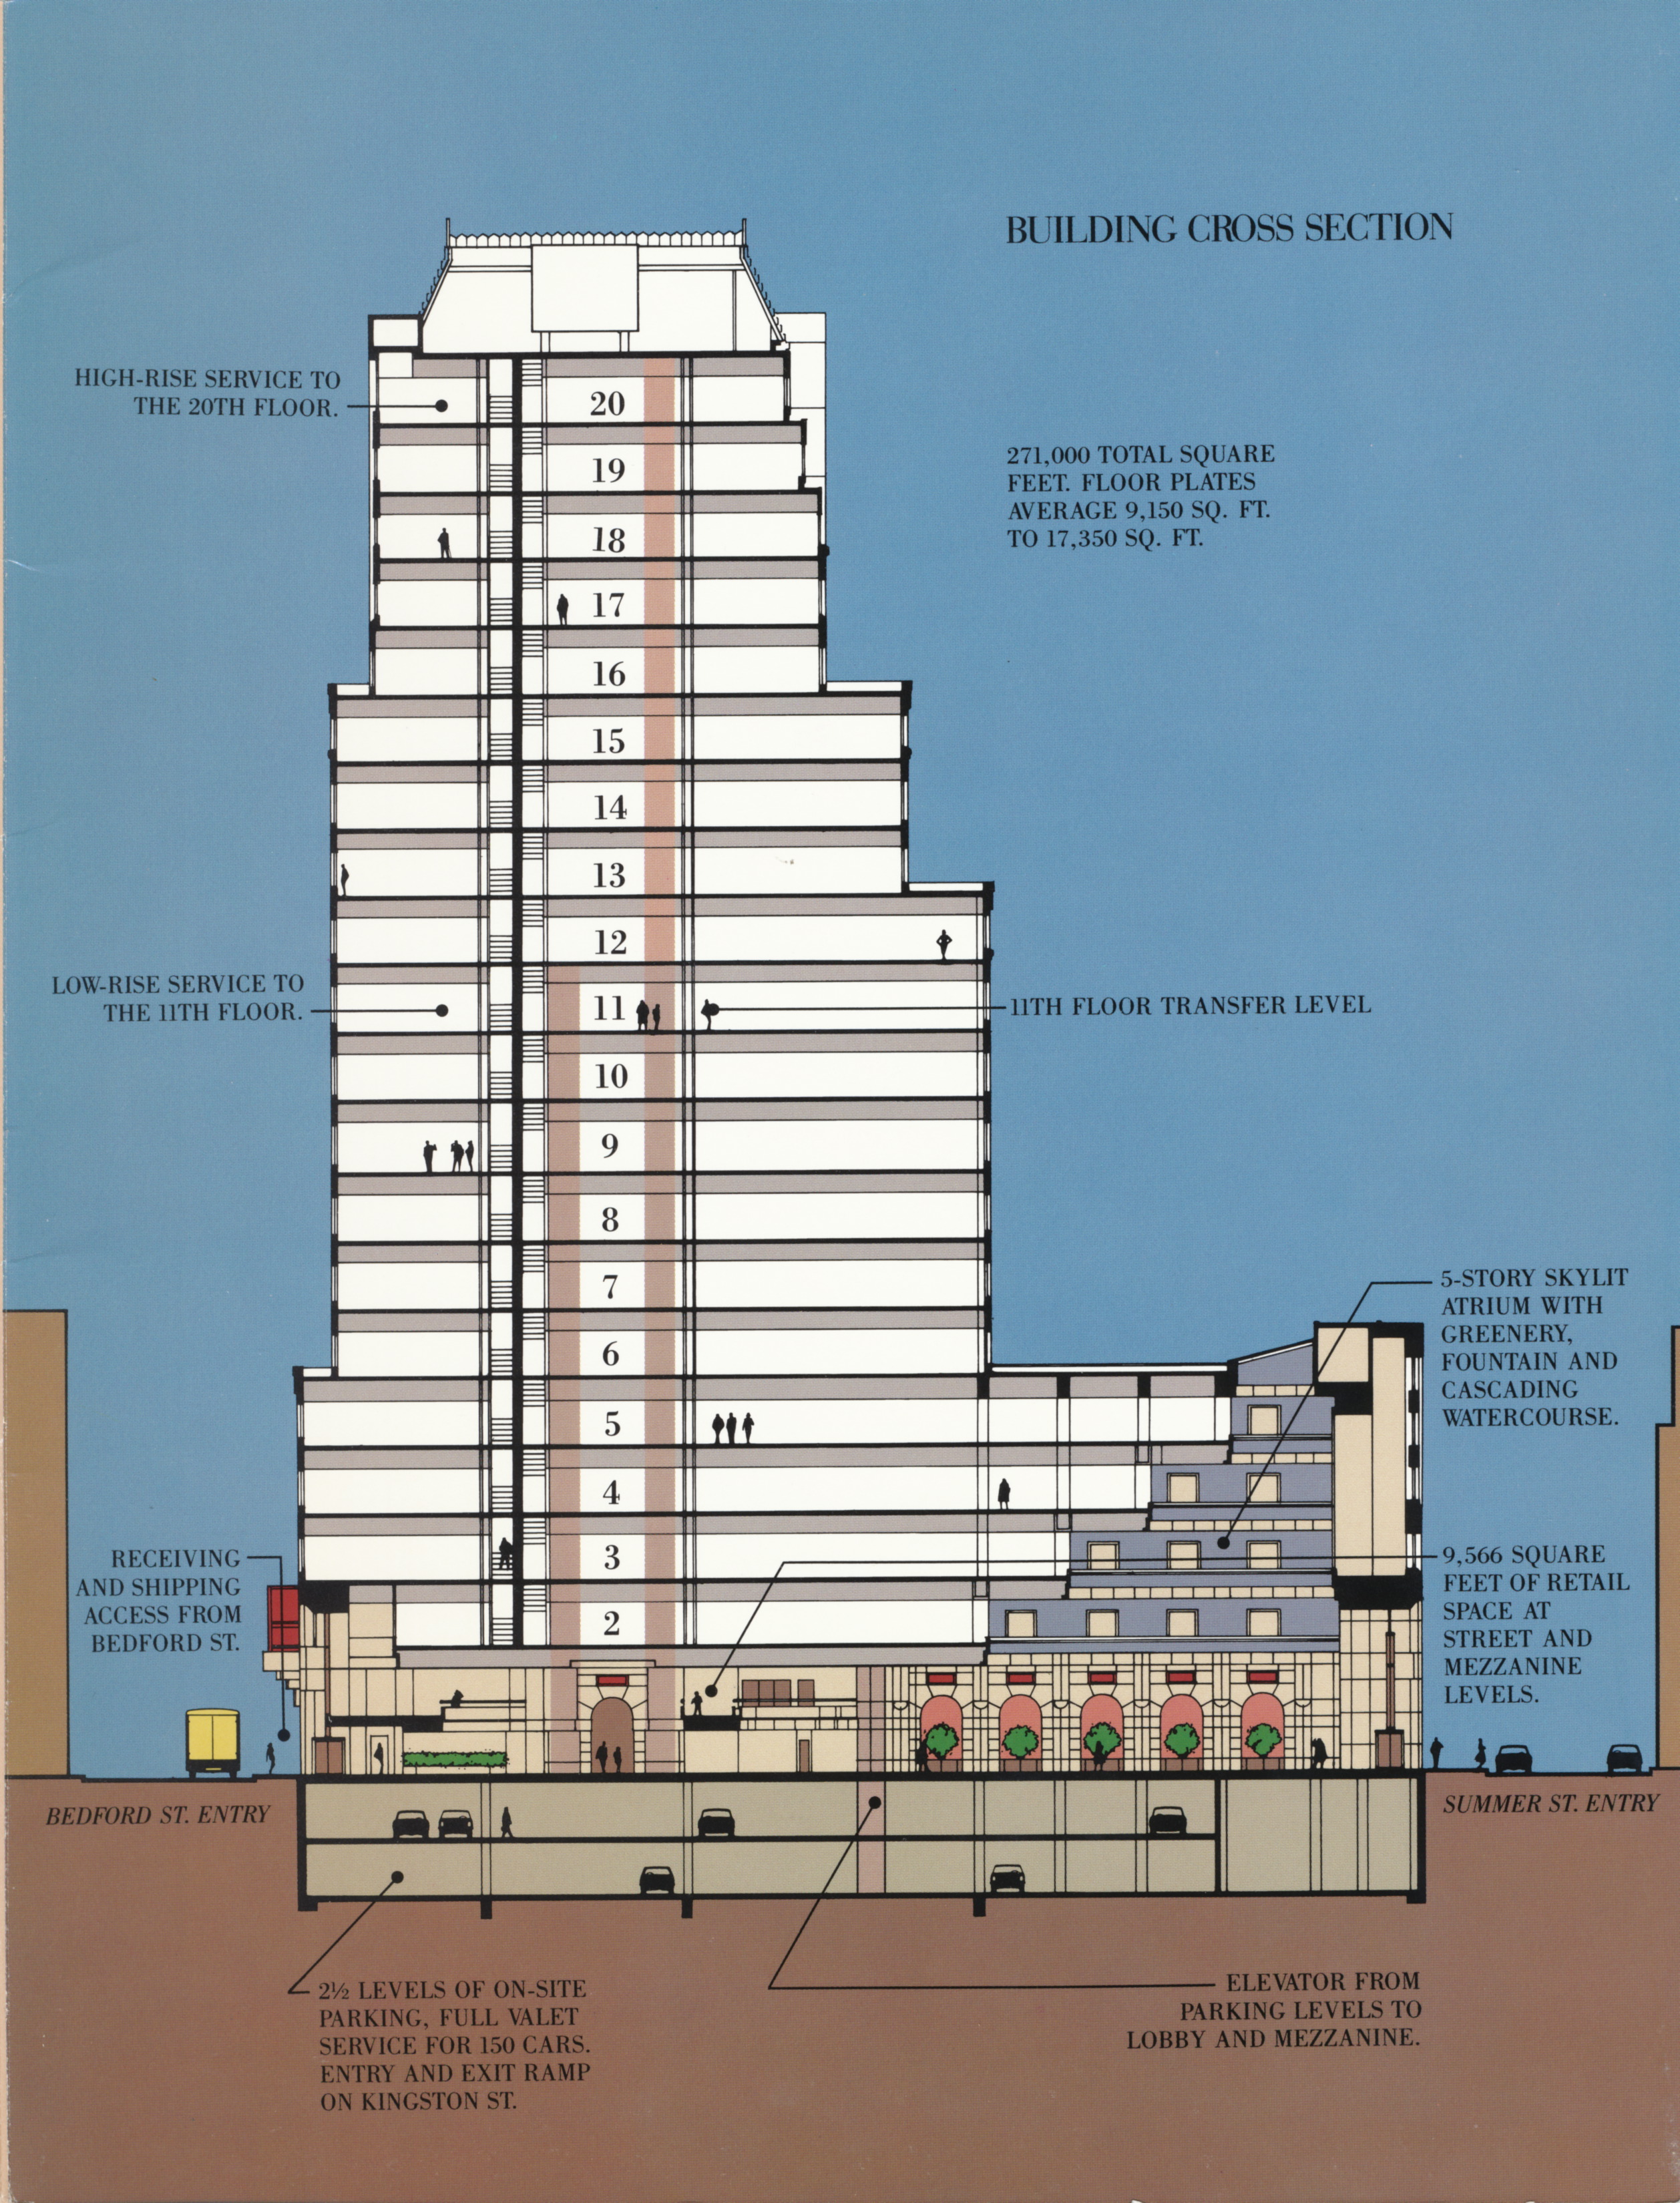 Cross section of the building, including the lower parking levels.